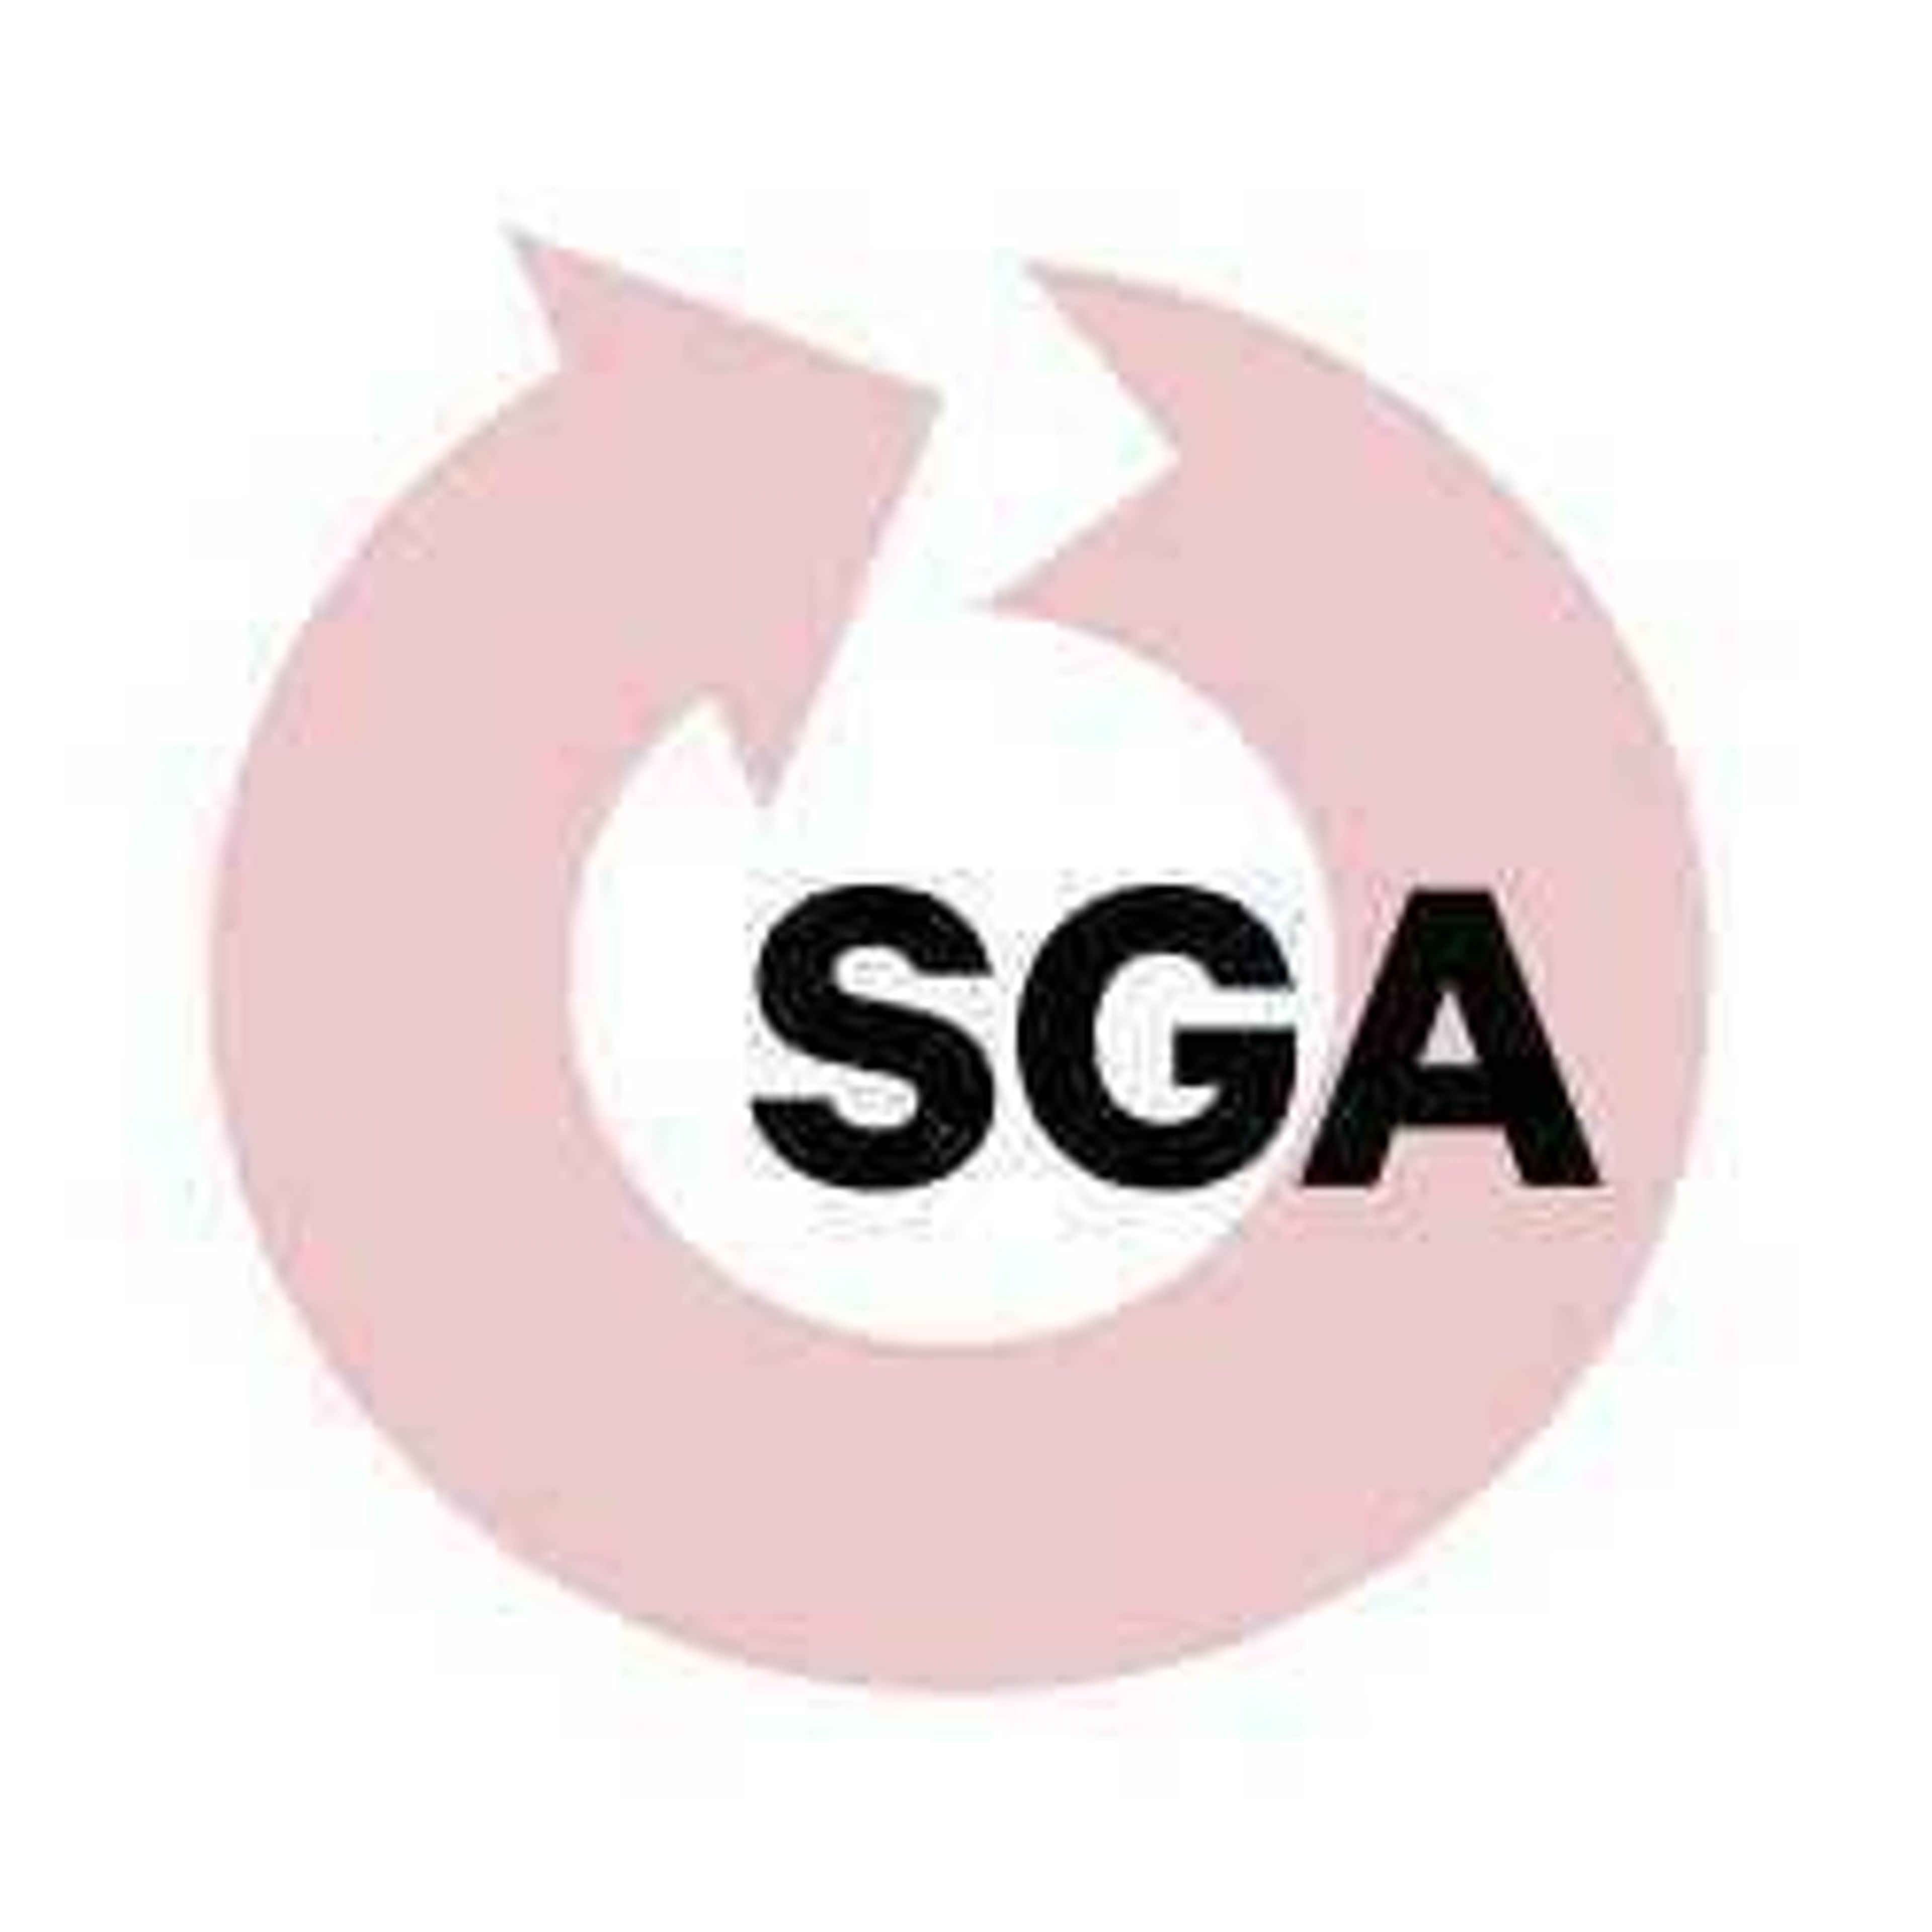 SGA discusses upcoming election, event funding and more